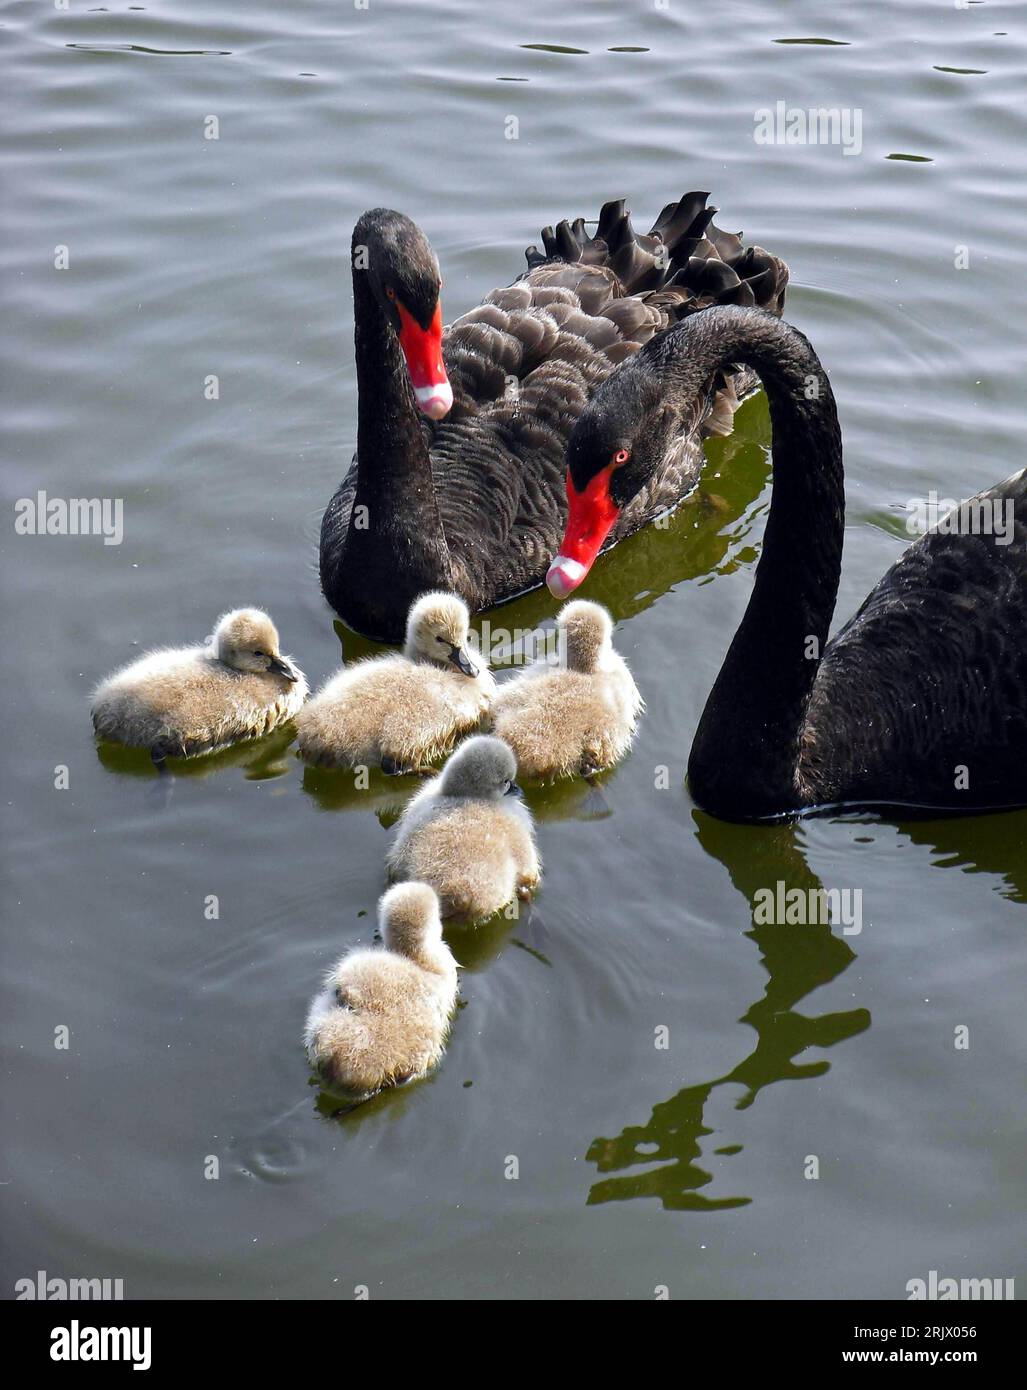 Schwan auf see photography Alamy hi-res - stock and images